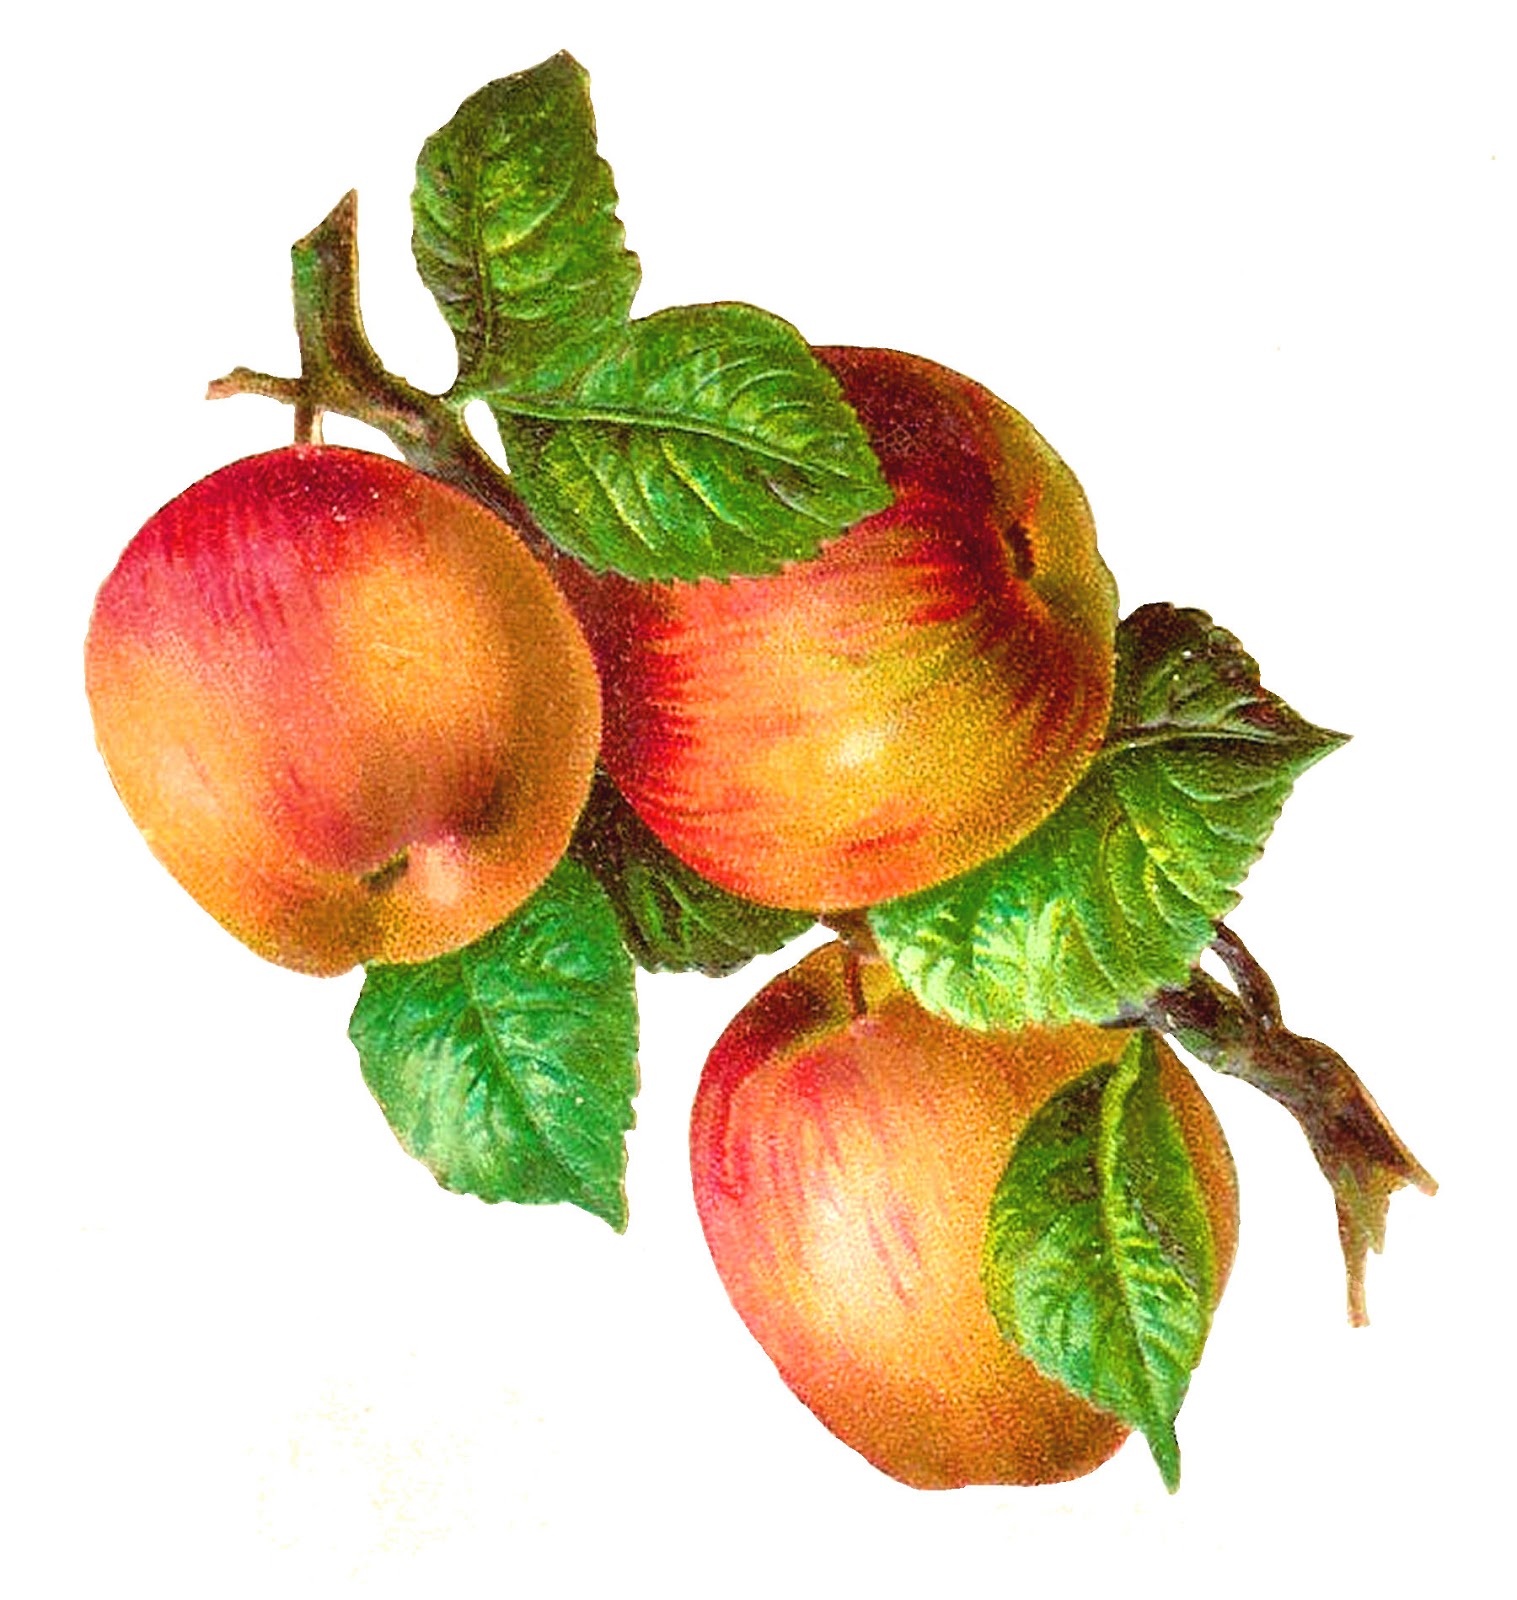 free clipart images of apples - photo #33